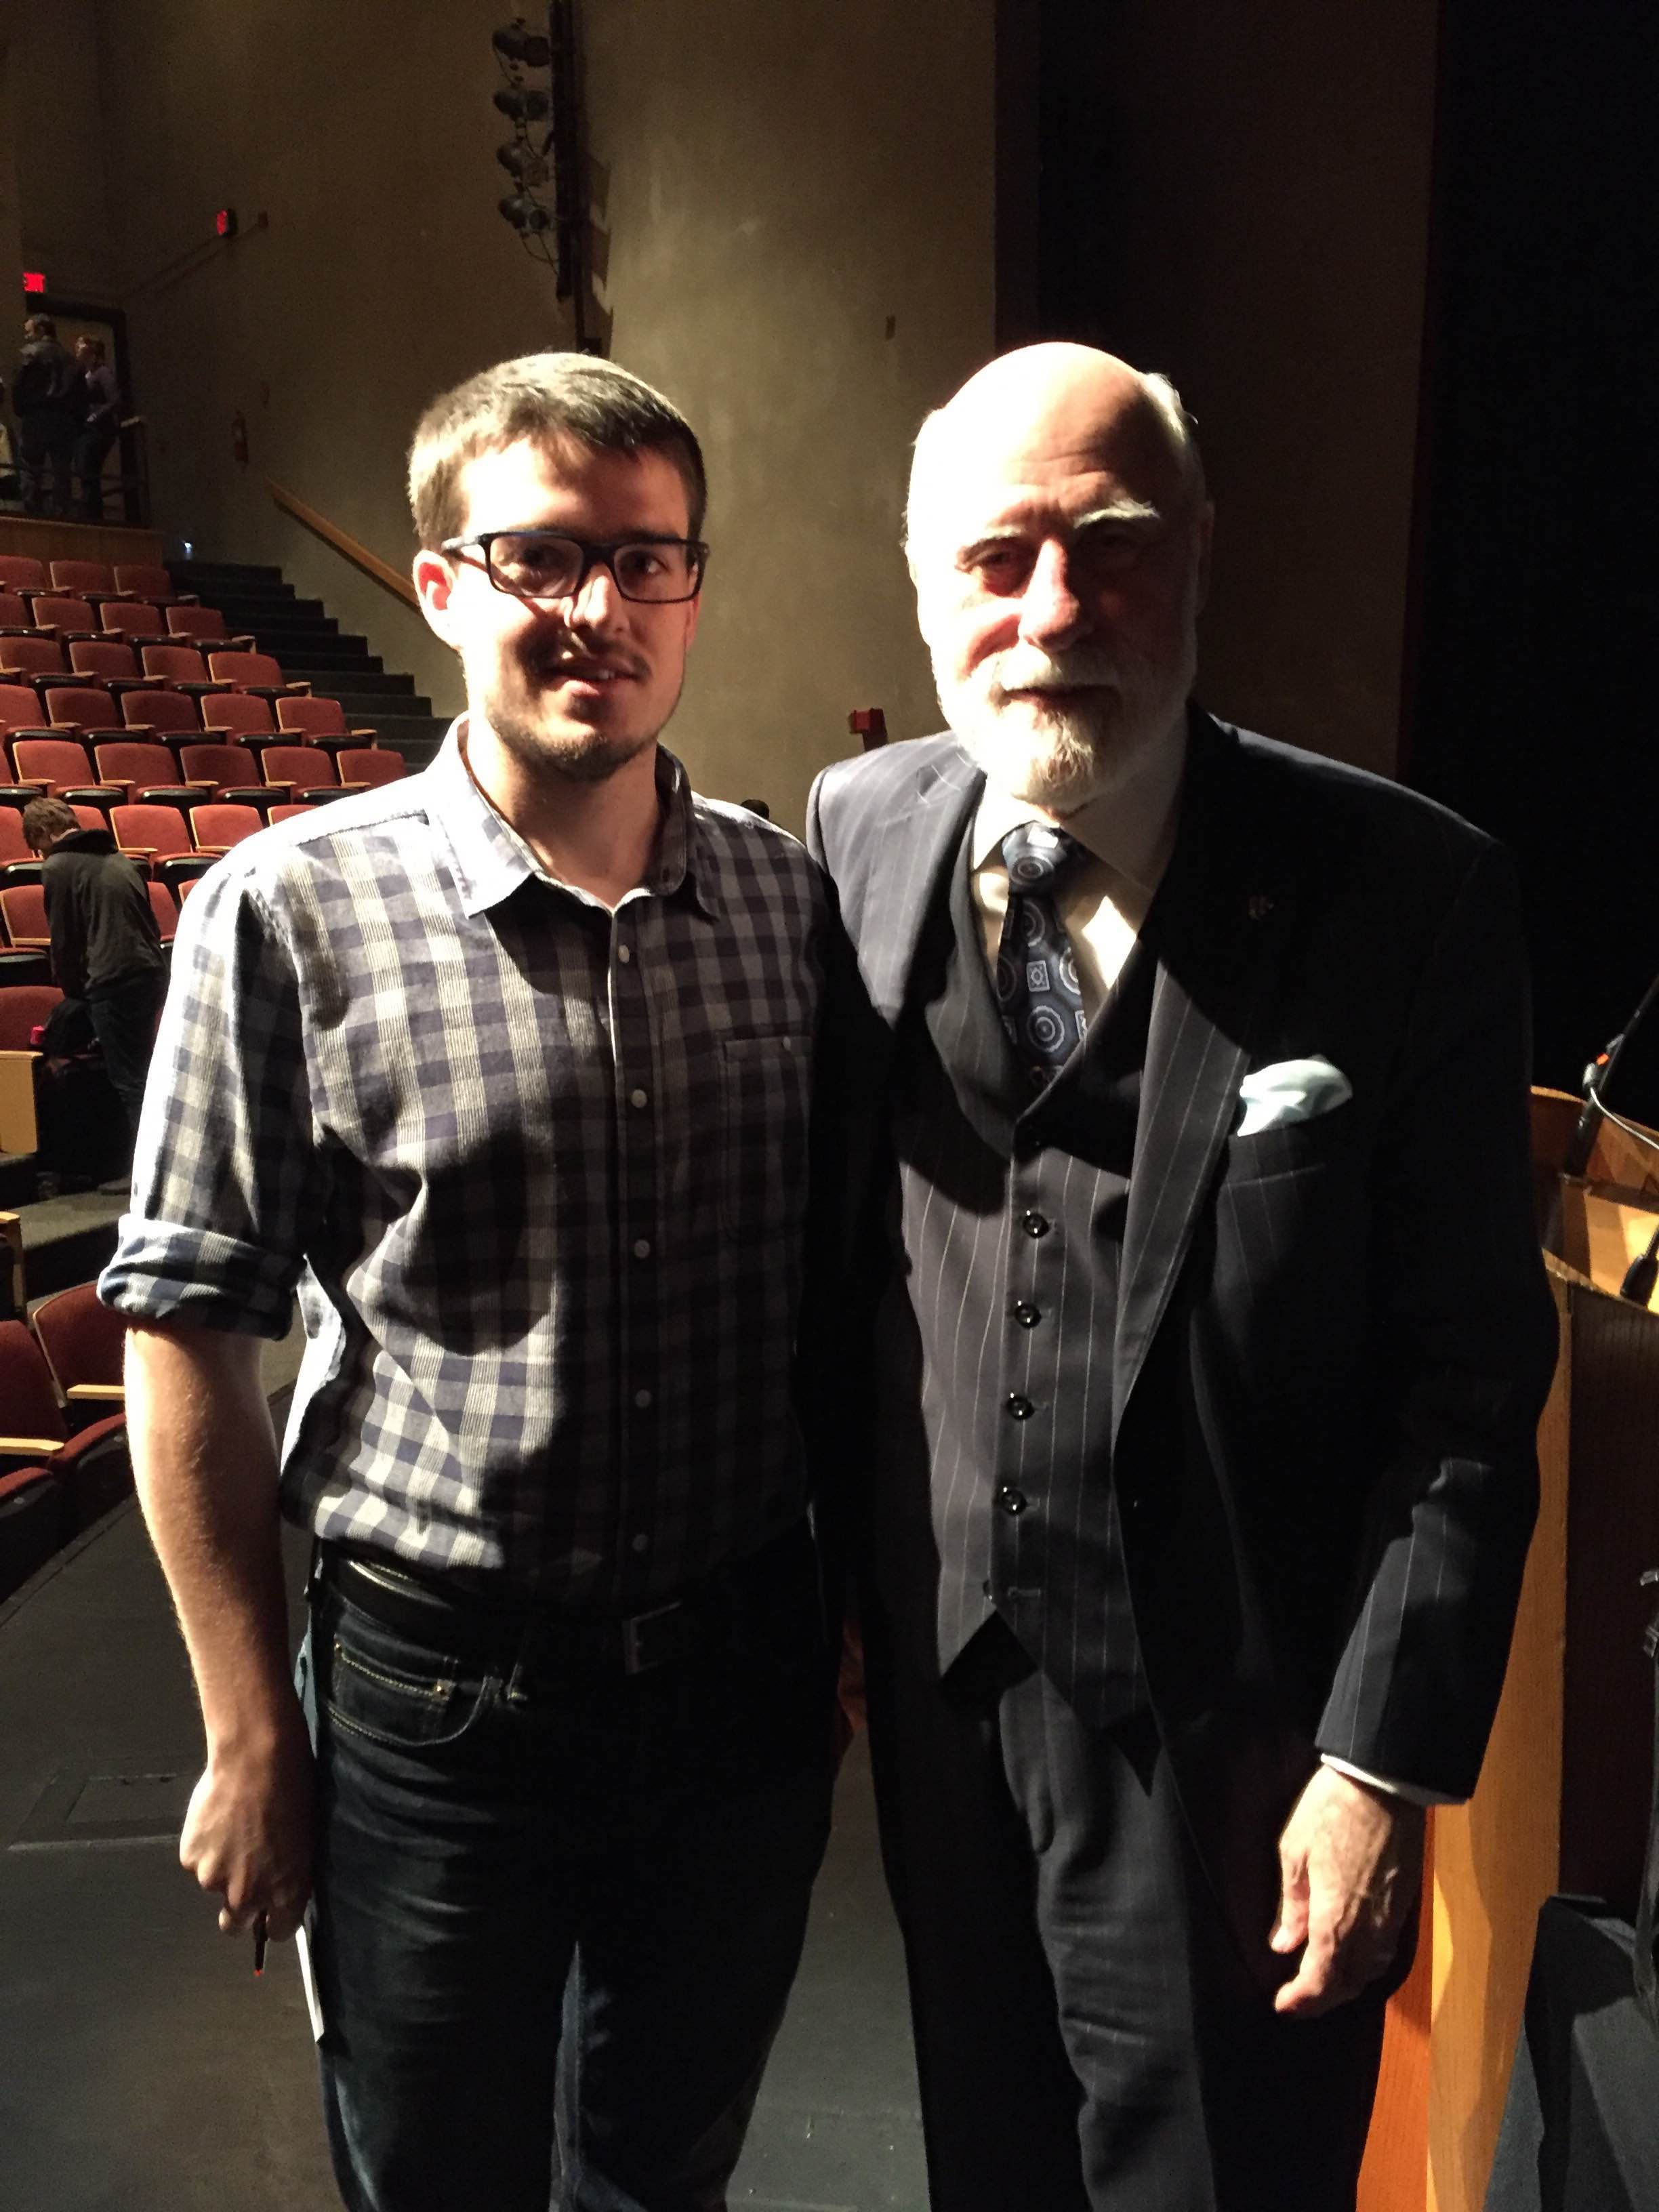 Vint Cerf and I